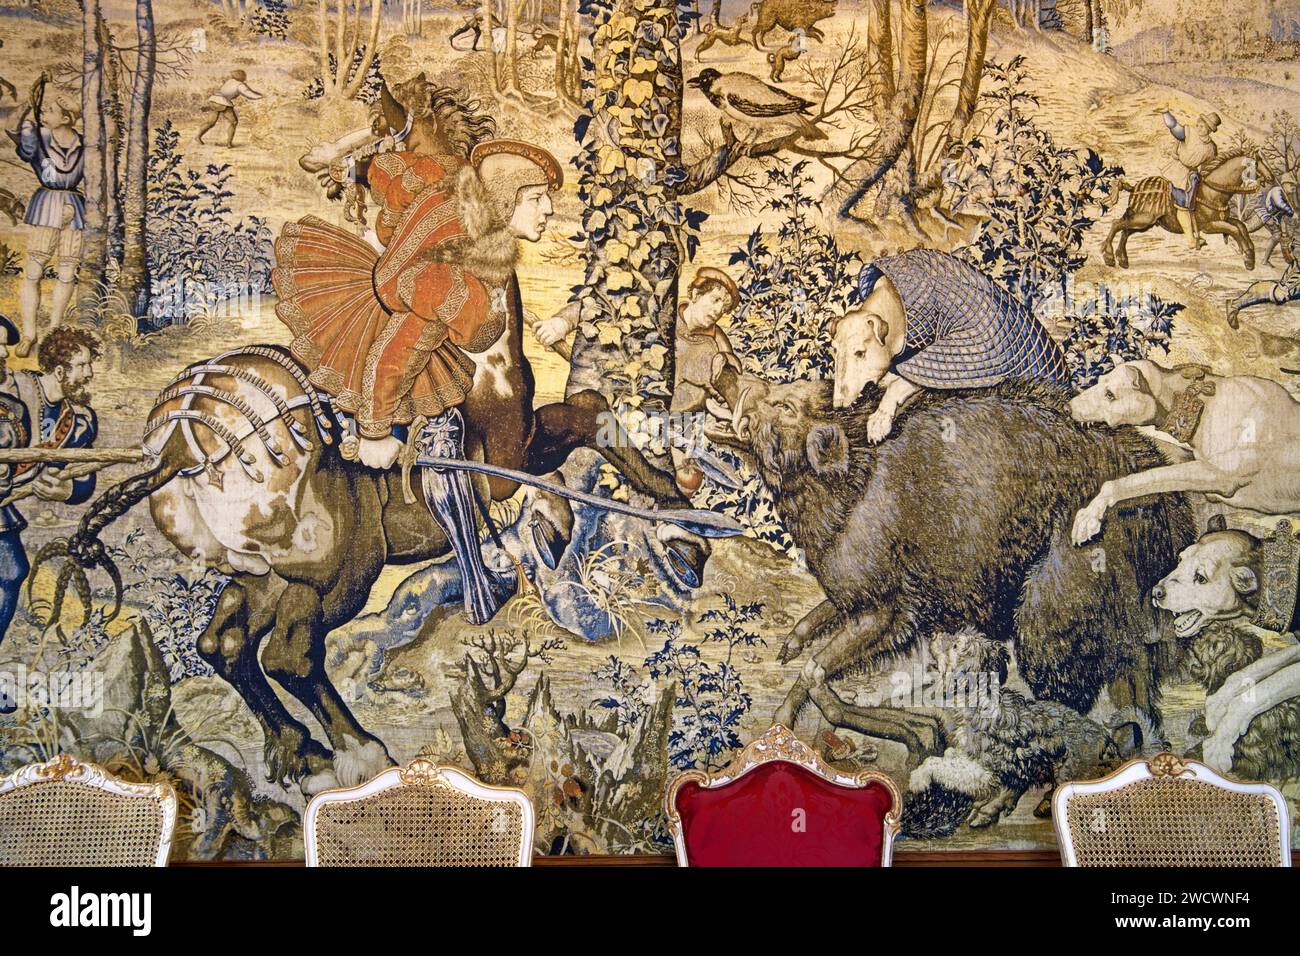 Germany, Baden Wurttemberg, Lake Constance (Bodensee), Meersburg, Neues Schloss (New castle),Schoßmuseum Meersburg (castel museum), prince bishop appartement, the tapestry series of the Chasses de Maximilien, Boar hunting Stock Photo